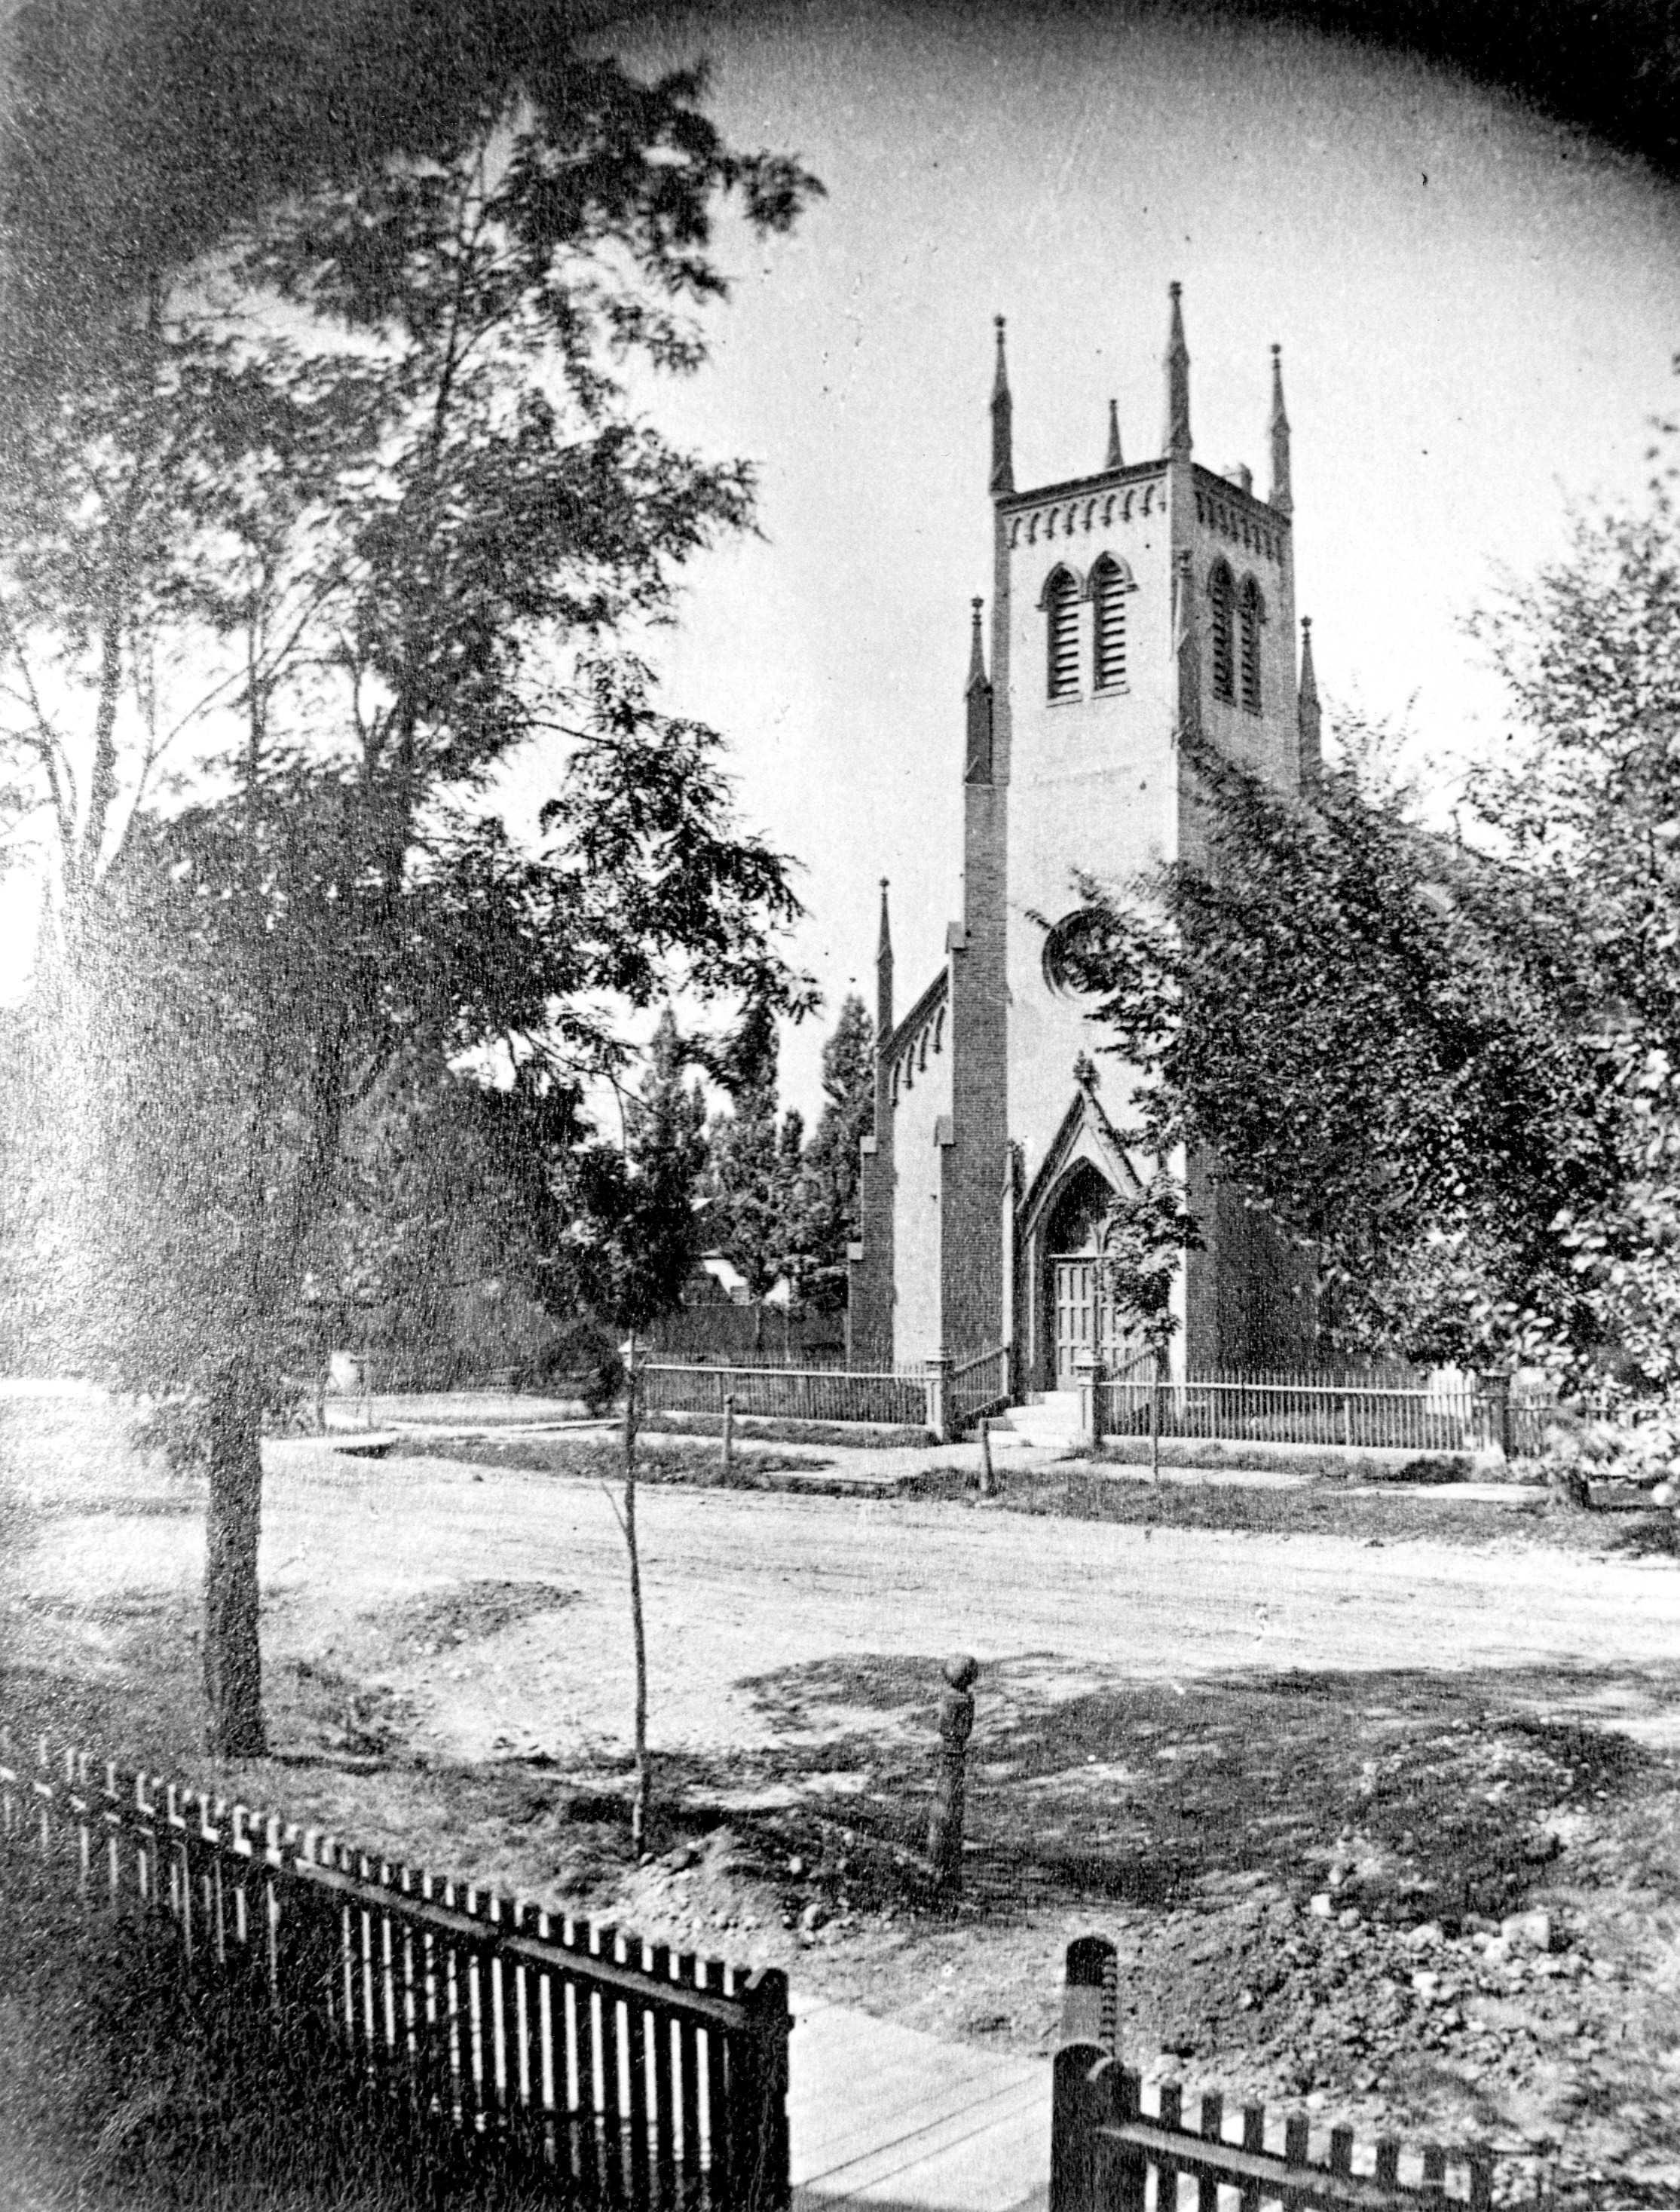 The North Presbyterian Church was built in 1851 at the corner of what is today E. State and N. Milwaukee Streets. In 1871, a Welsh congregation purchased the building, and it operated as the Welsh Presbyterian Church until 1954.